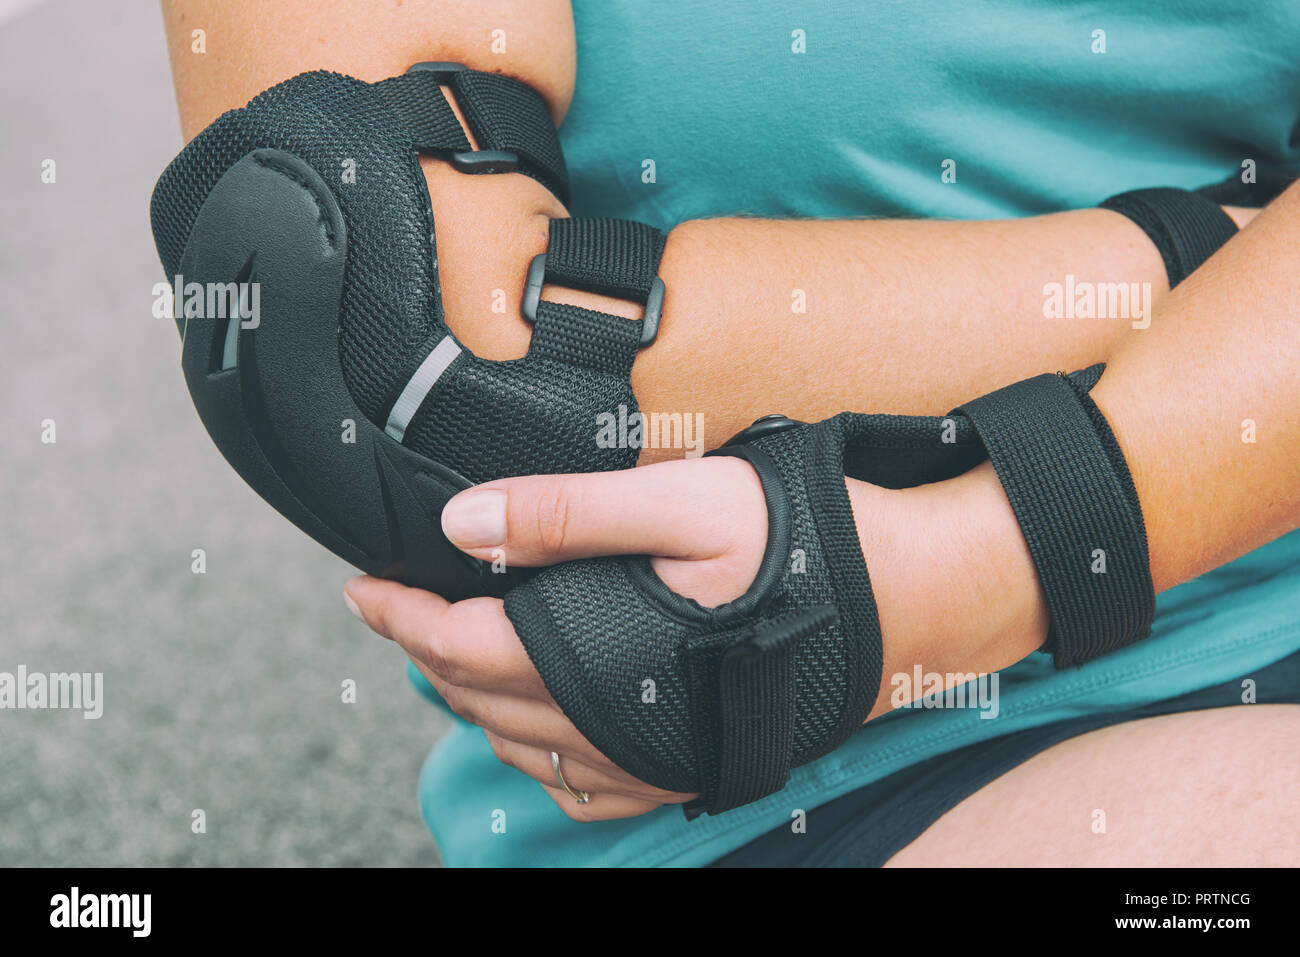 Woman rollerskater with elbow protector pads on her hand and wearing wrist guards Stock Photo